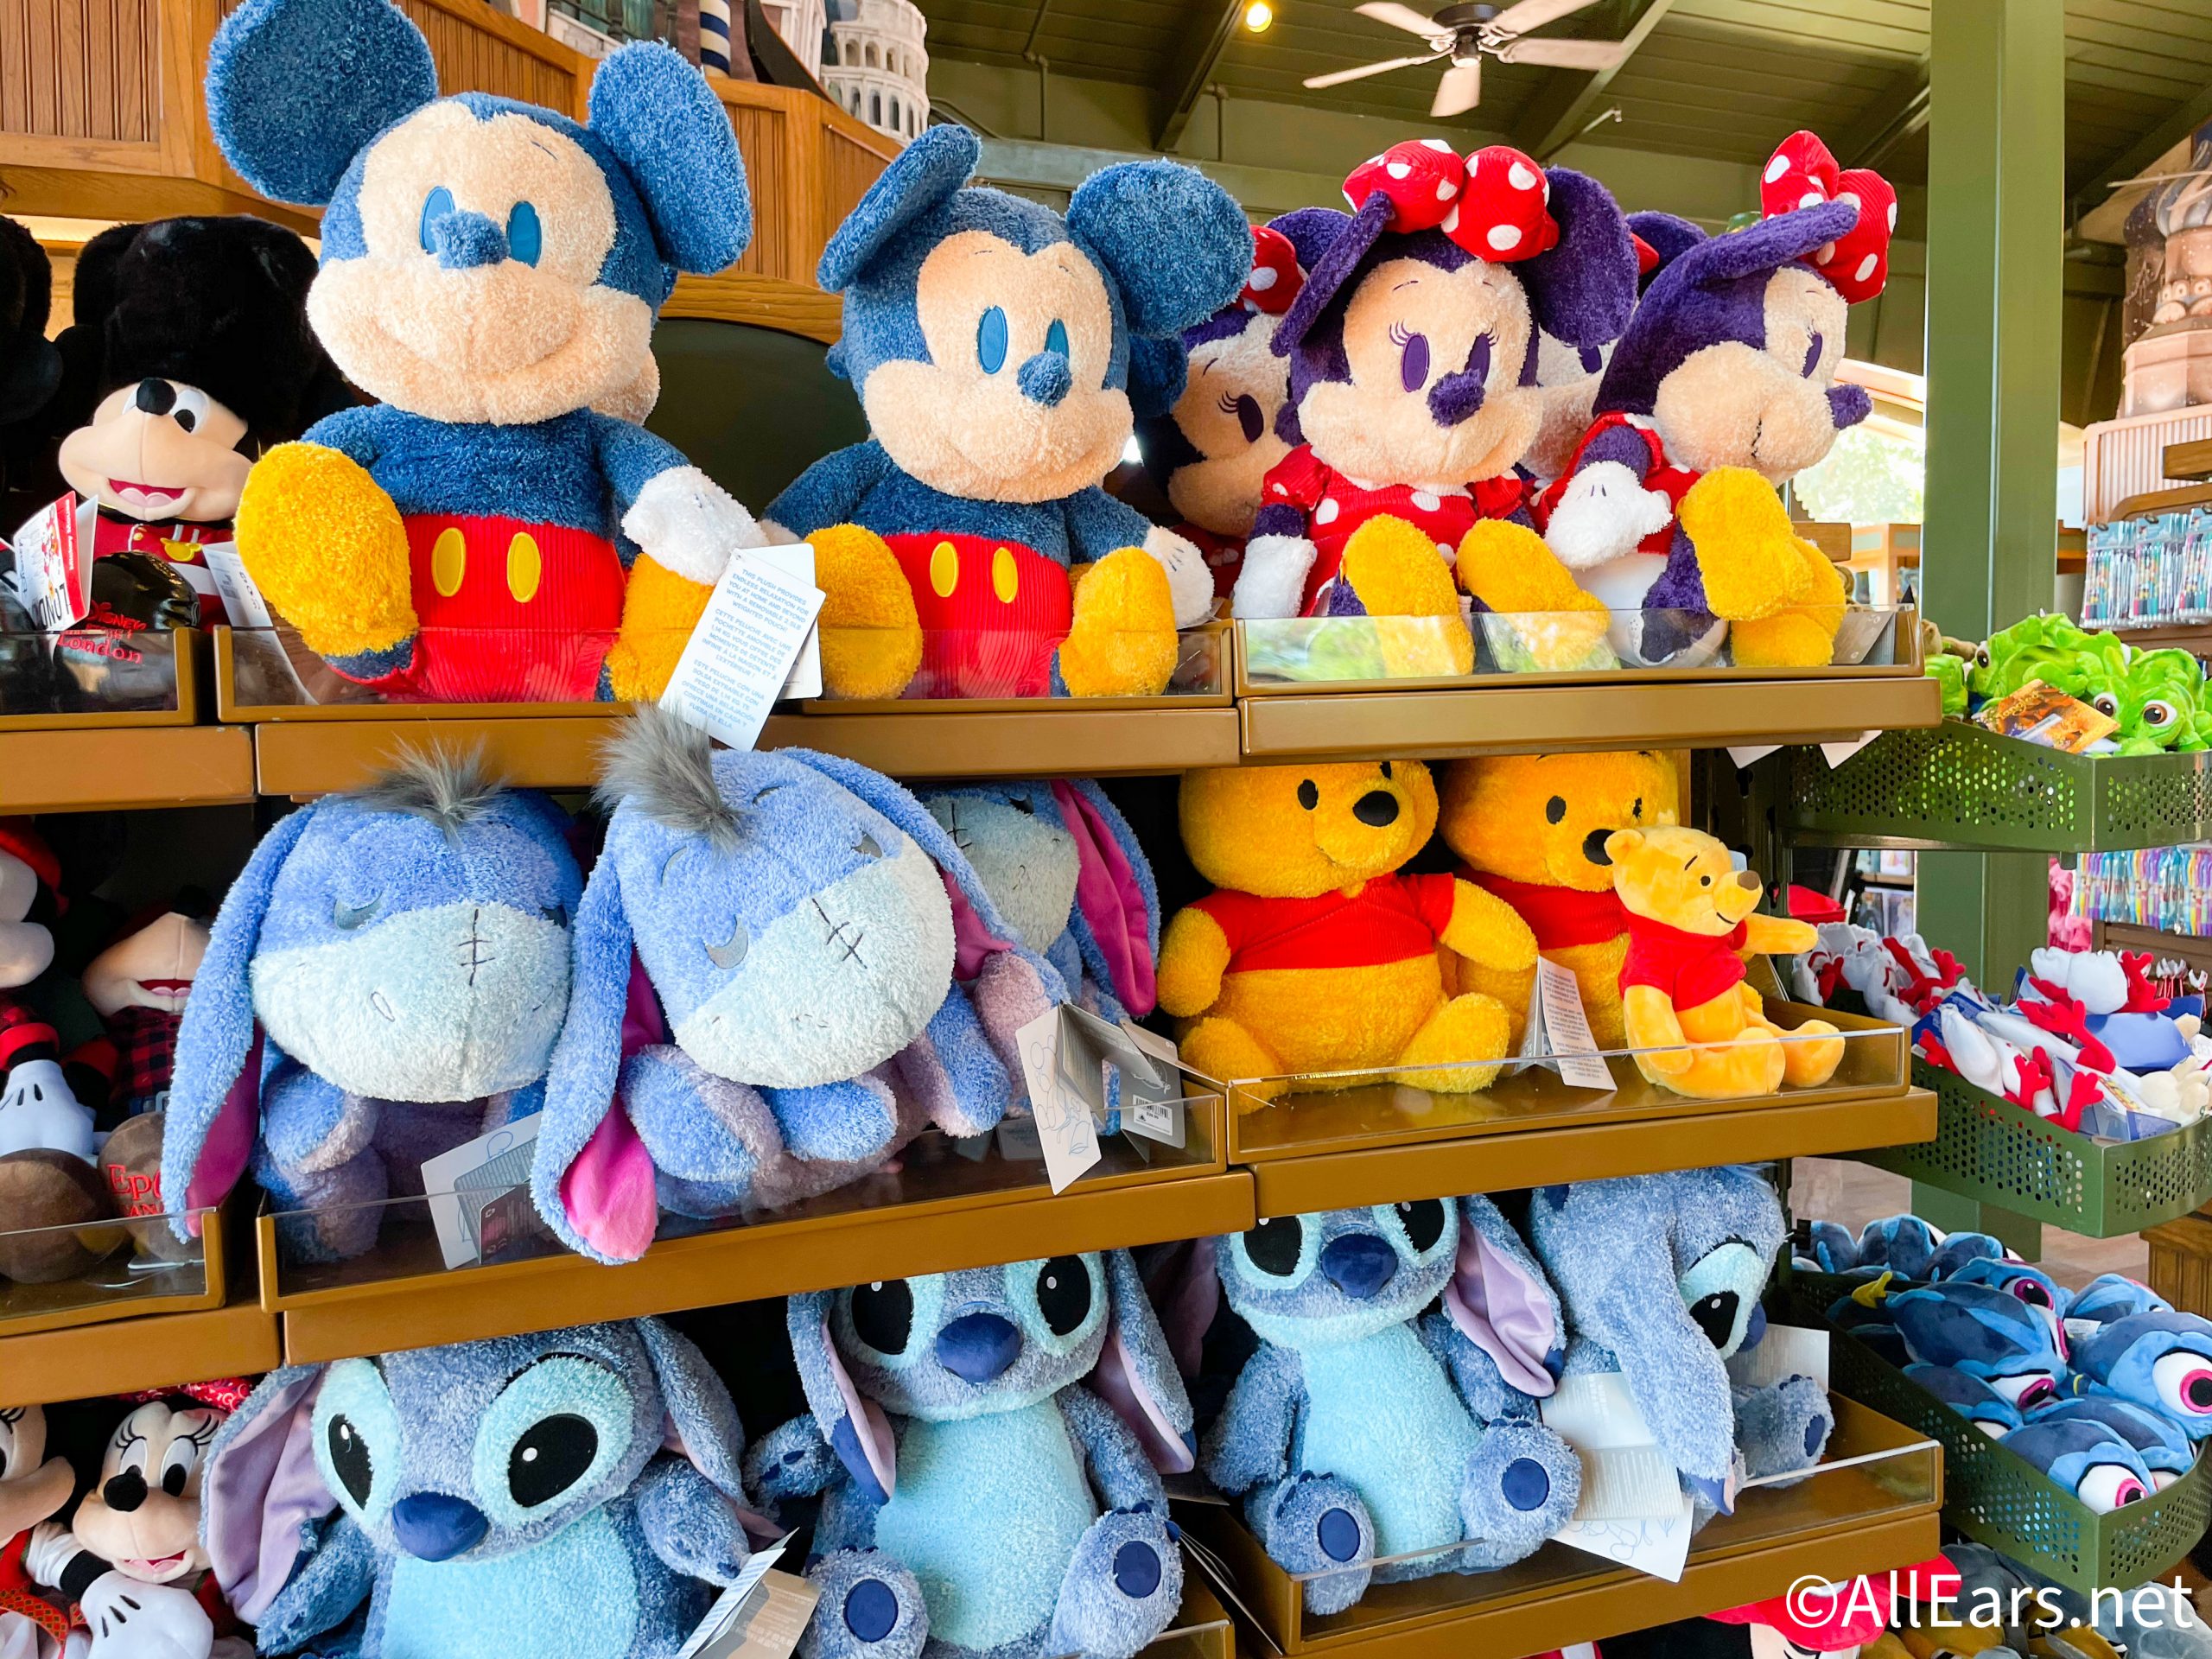 Disney Store Plush choose your Plush-new with tags-DOLLS,CHARACTERS